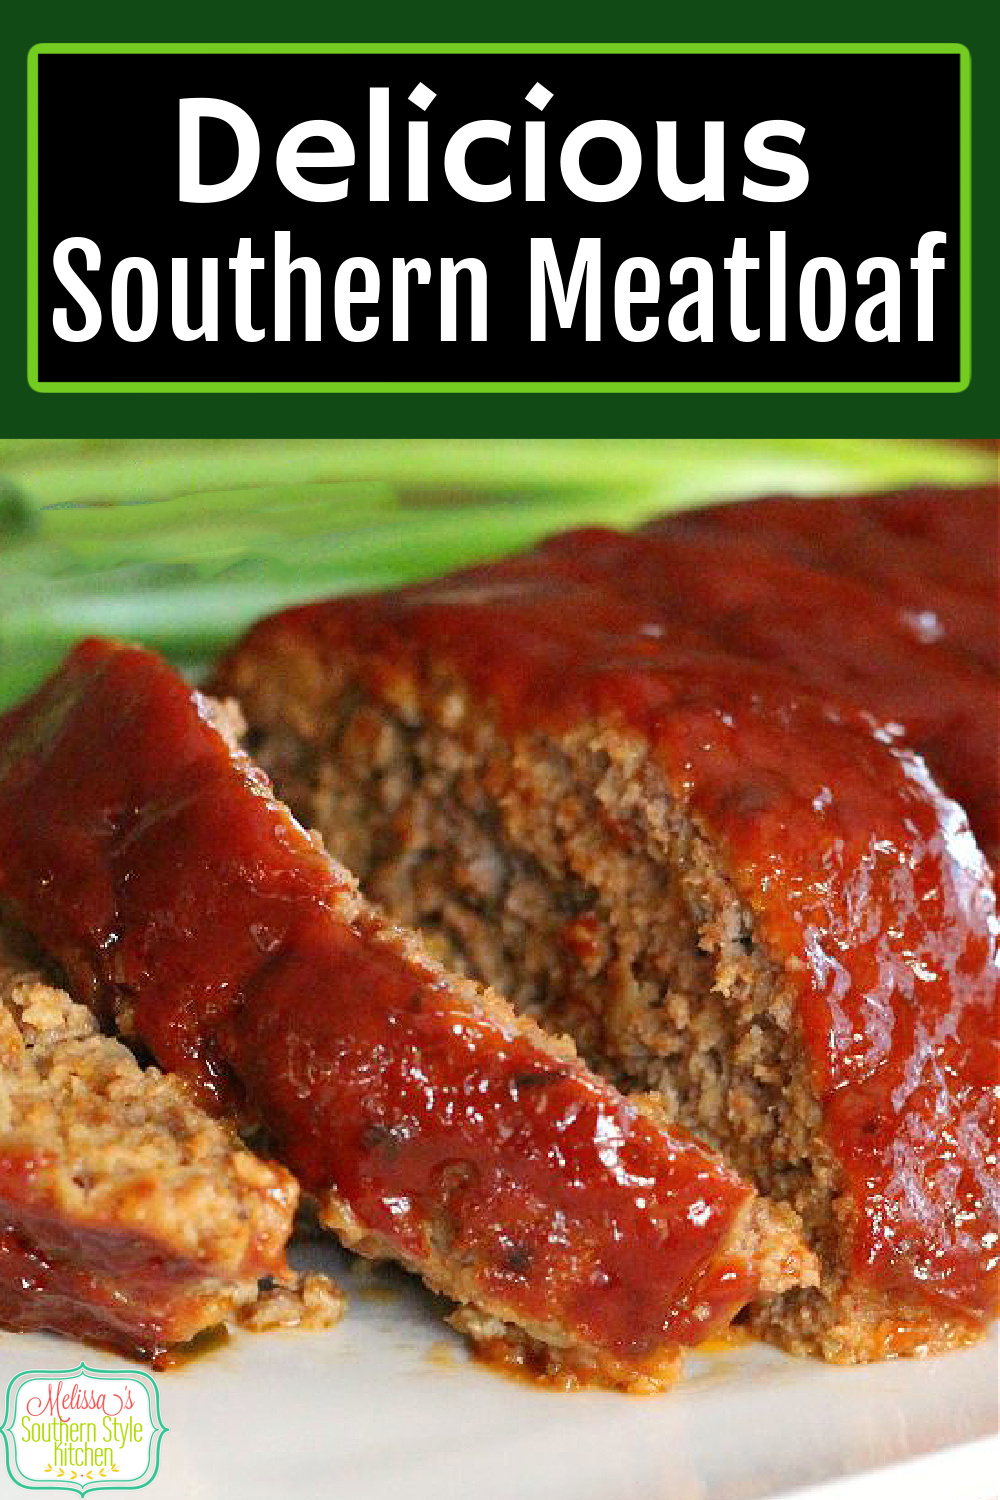 Southern Meatloaf: Flavorful, Nutritious, and Highly Rated